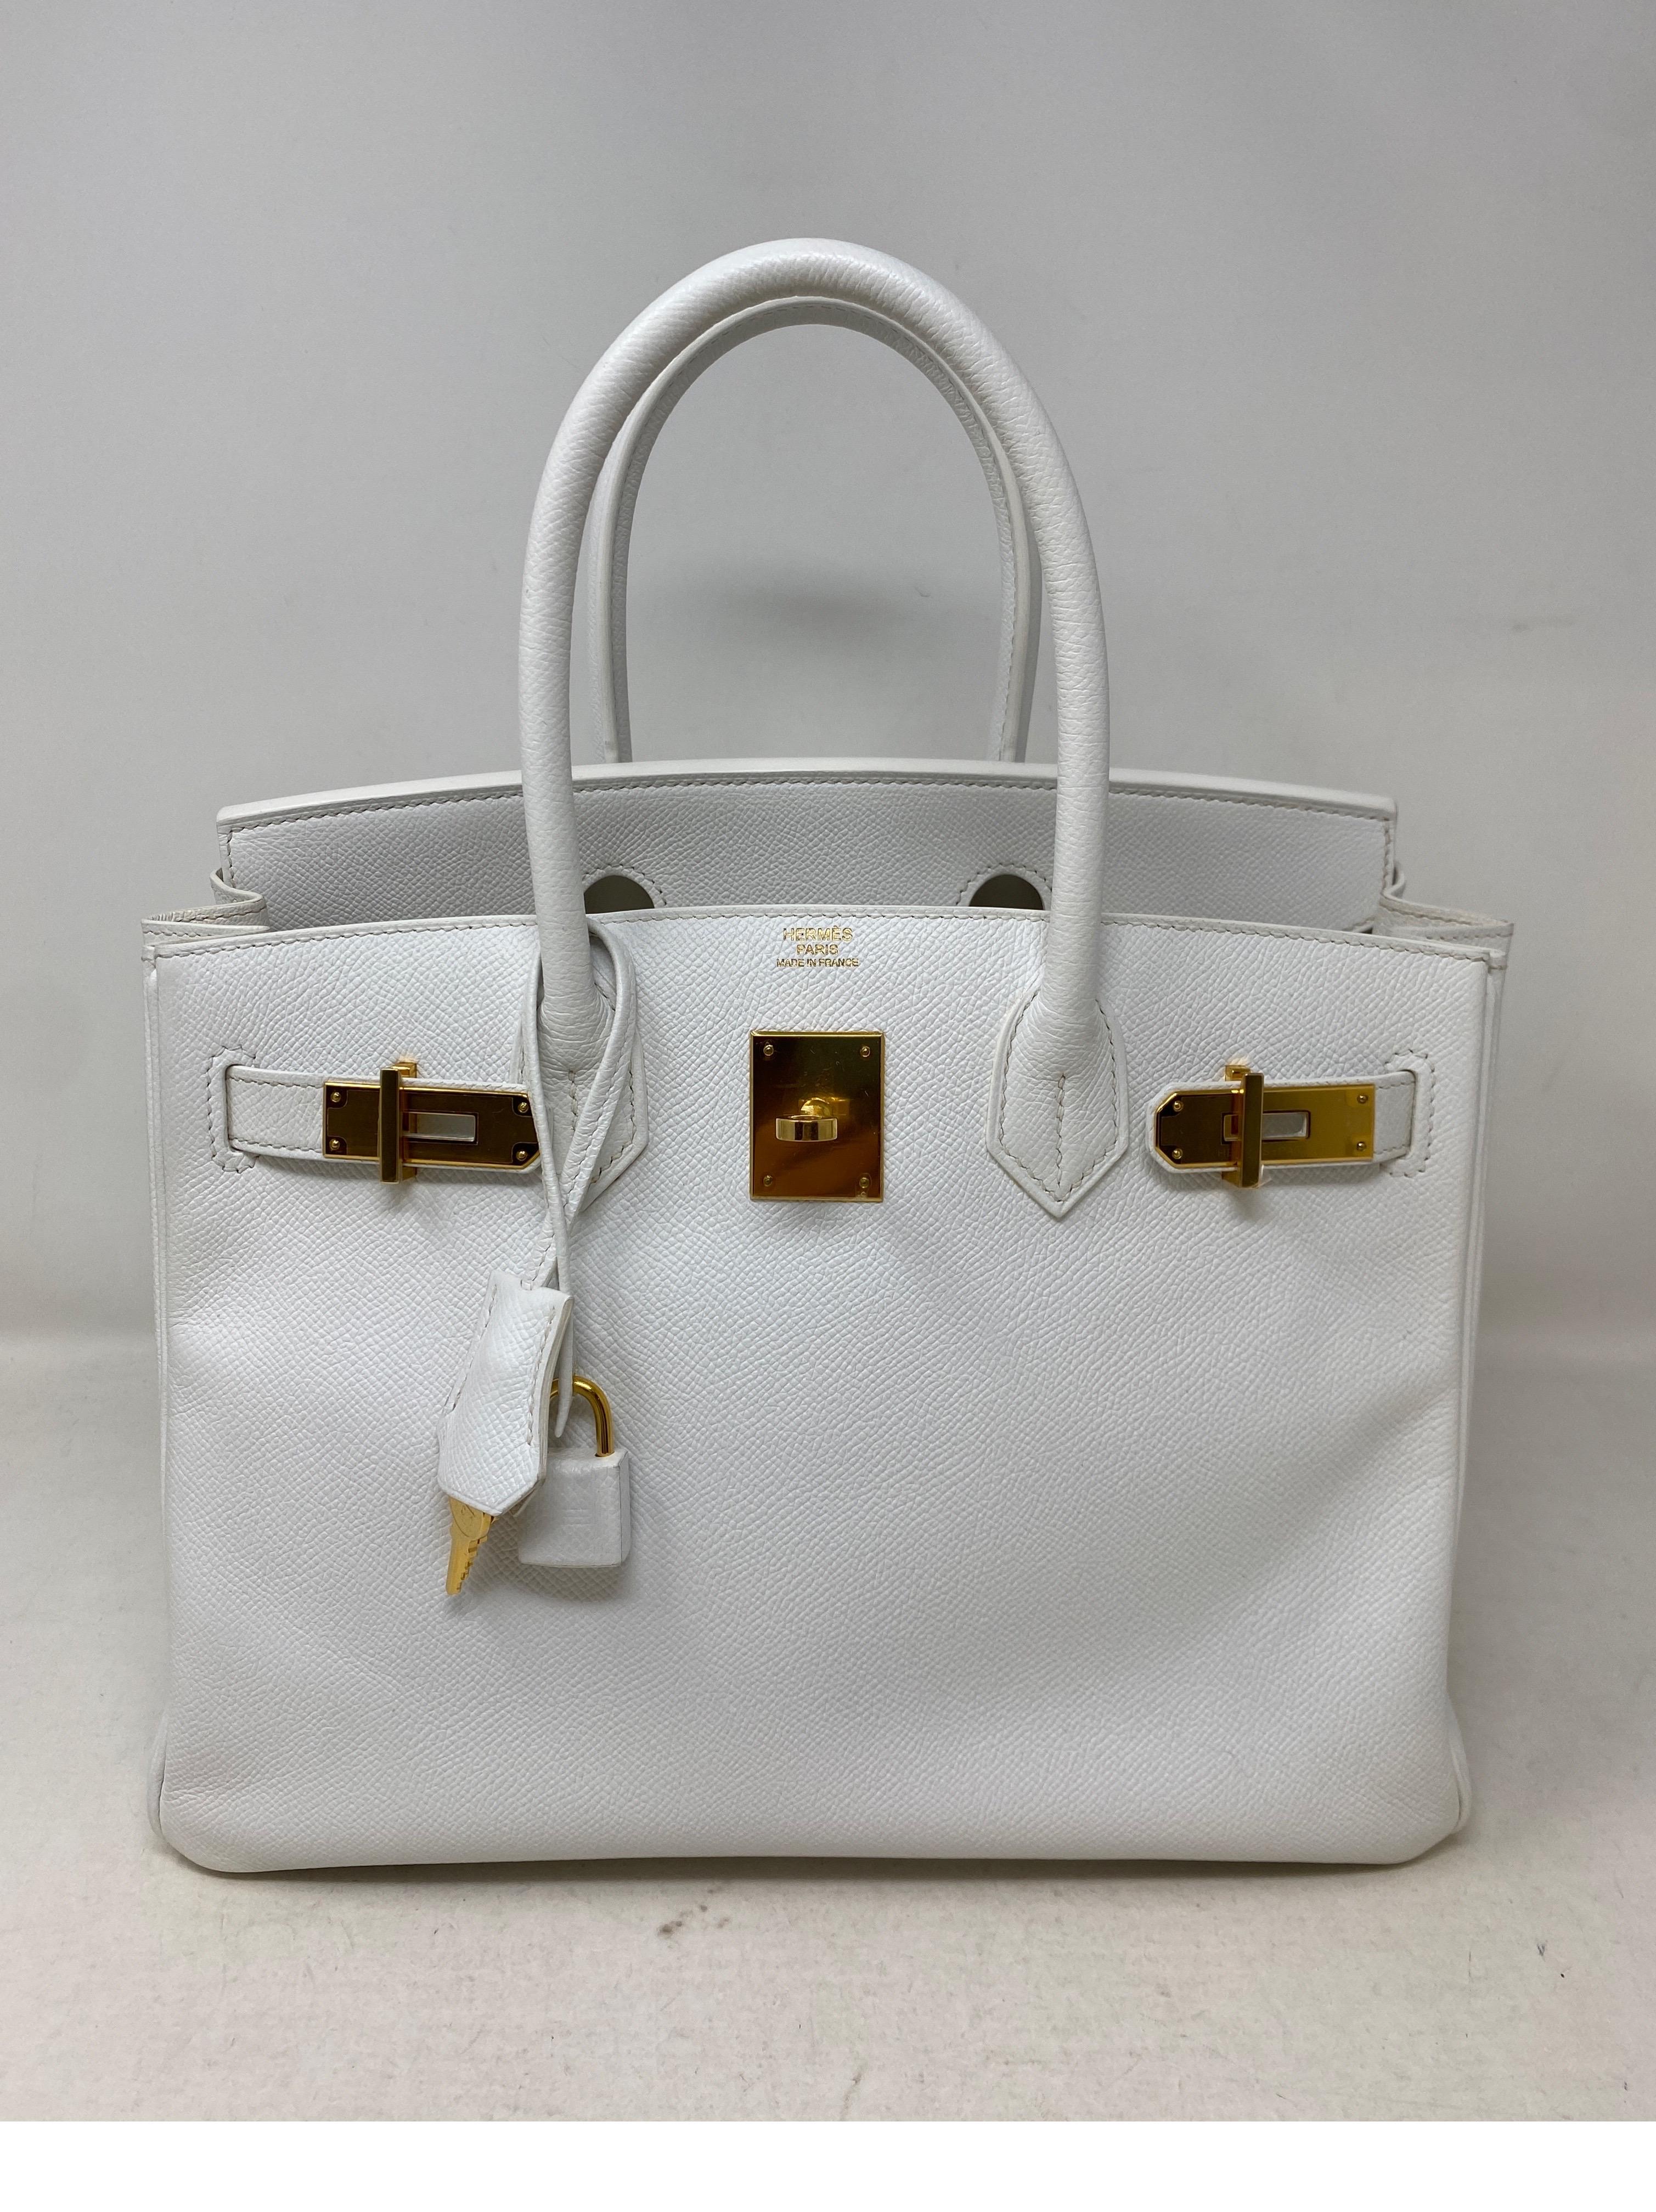 Hermes White Birkin 30 Bag. Gold hardware. Epsom leather. Rare white Birkin. Most wanted size 30. Includes clochette, lock keys, and dust bag. Guaranteed authentic. 